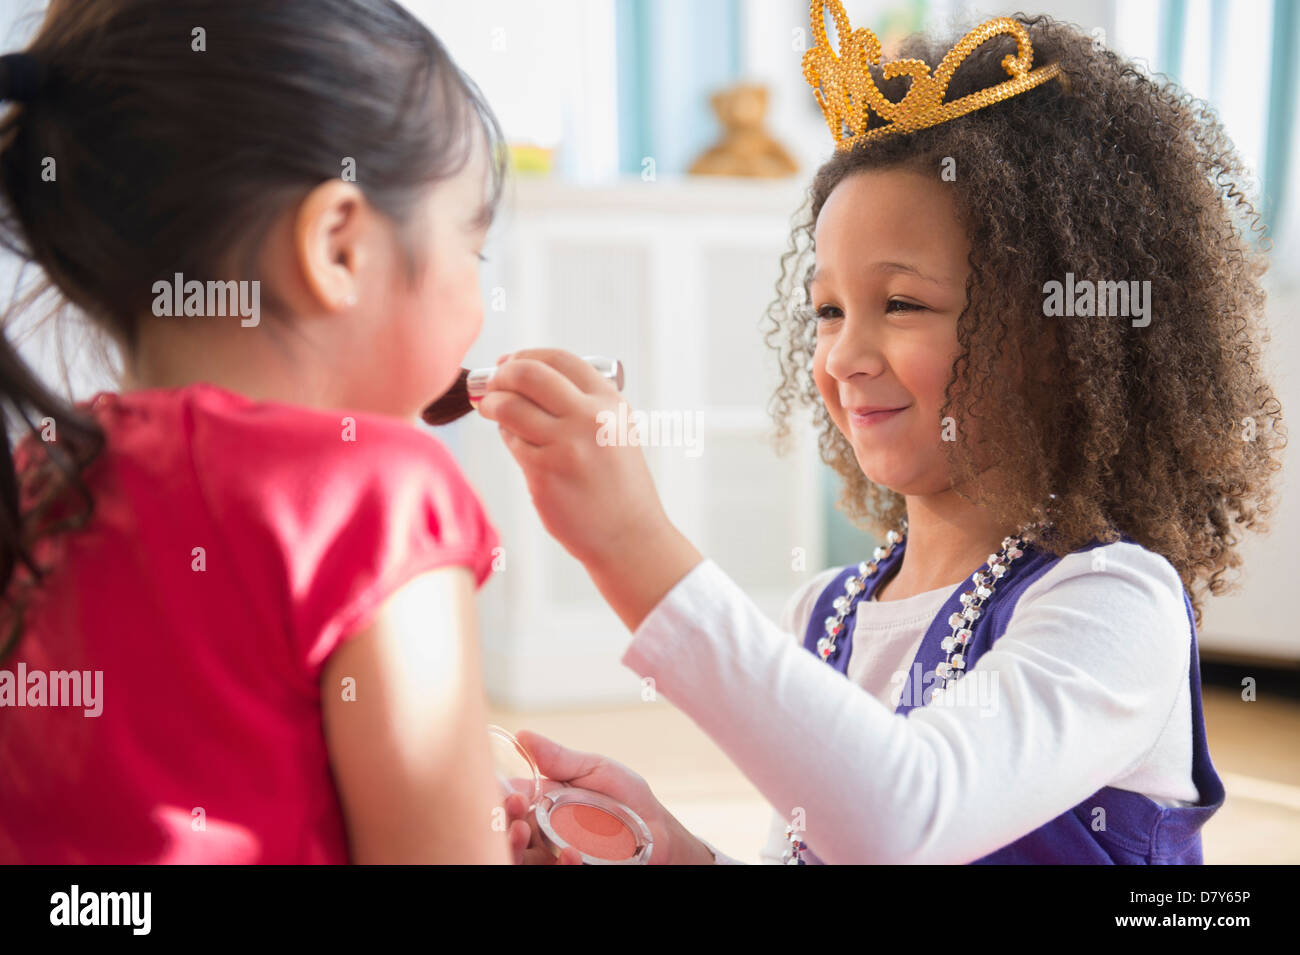 Girls playing dress up together Stock Photo